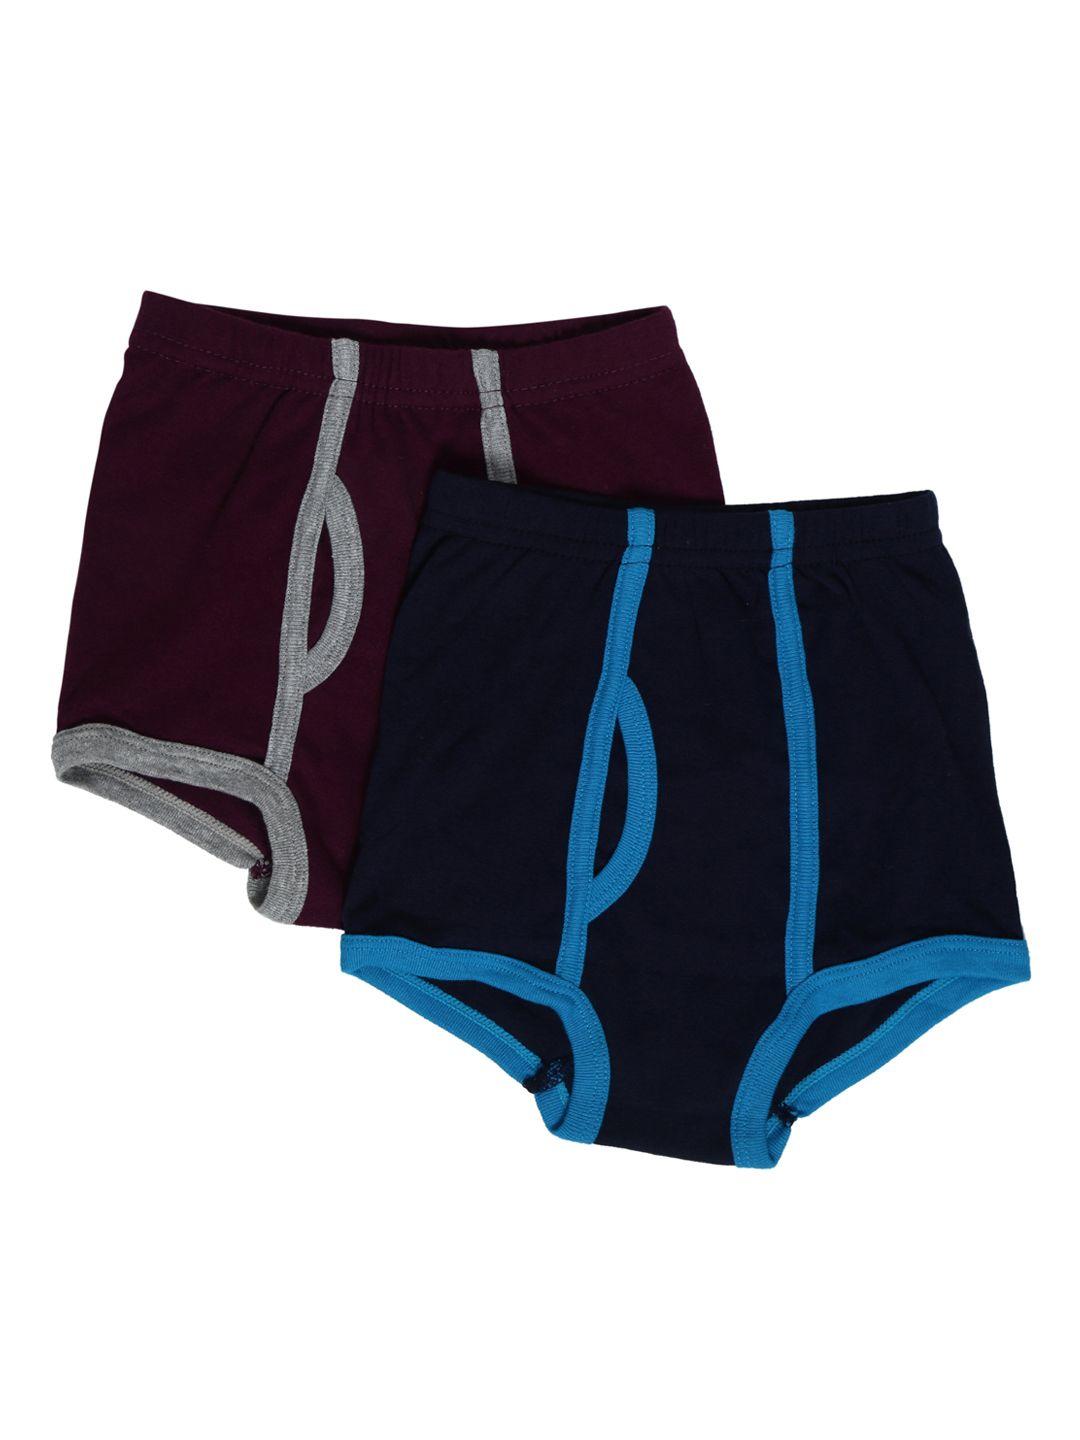 yk-boys-pack-of-2-assorted-boy-shorts